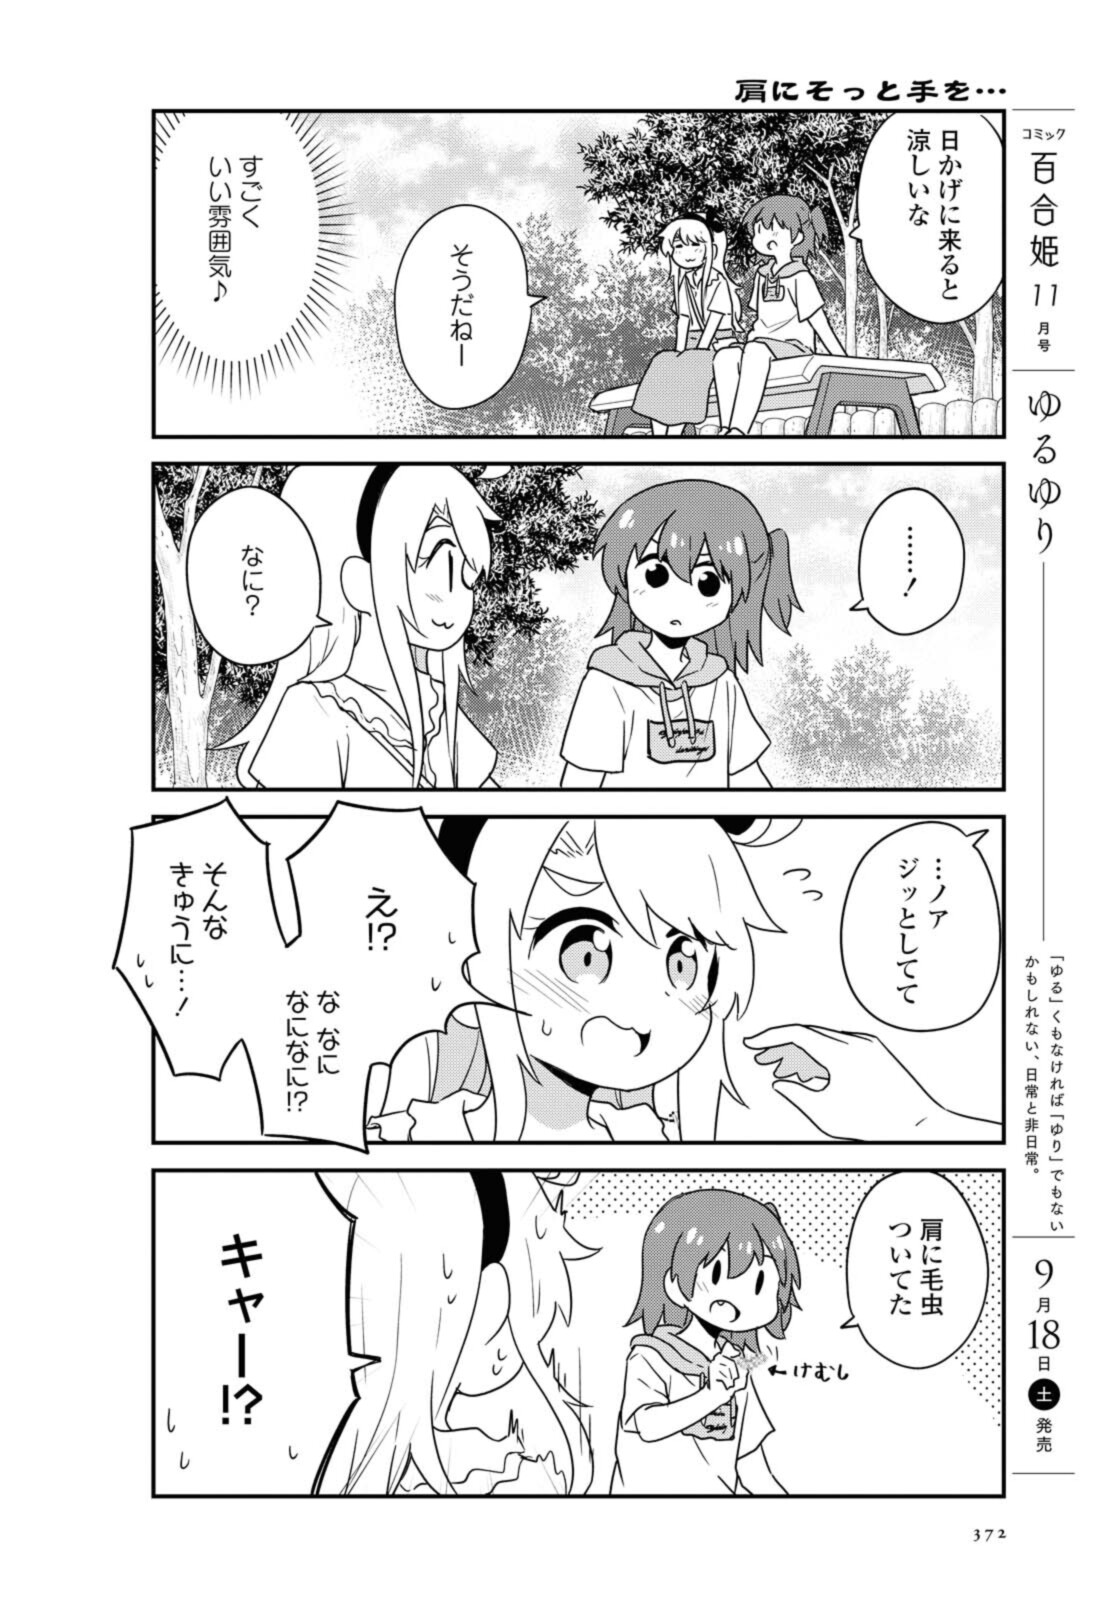 Wataten! An Angel Flew Down to Me 私に天使が舞い降りた！ 第86.2話 - Page 1